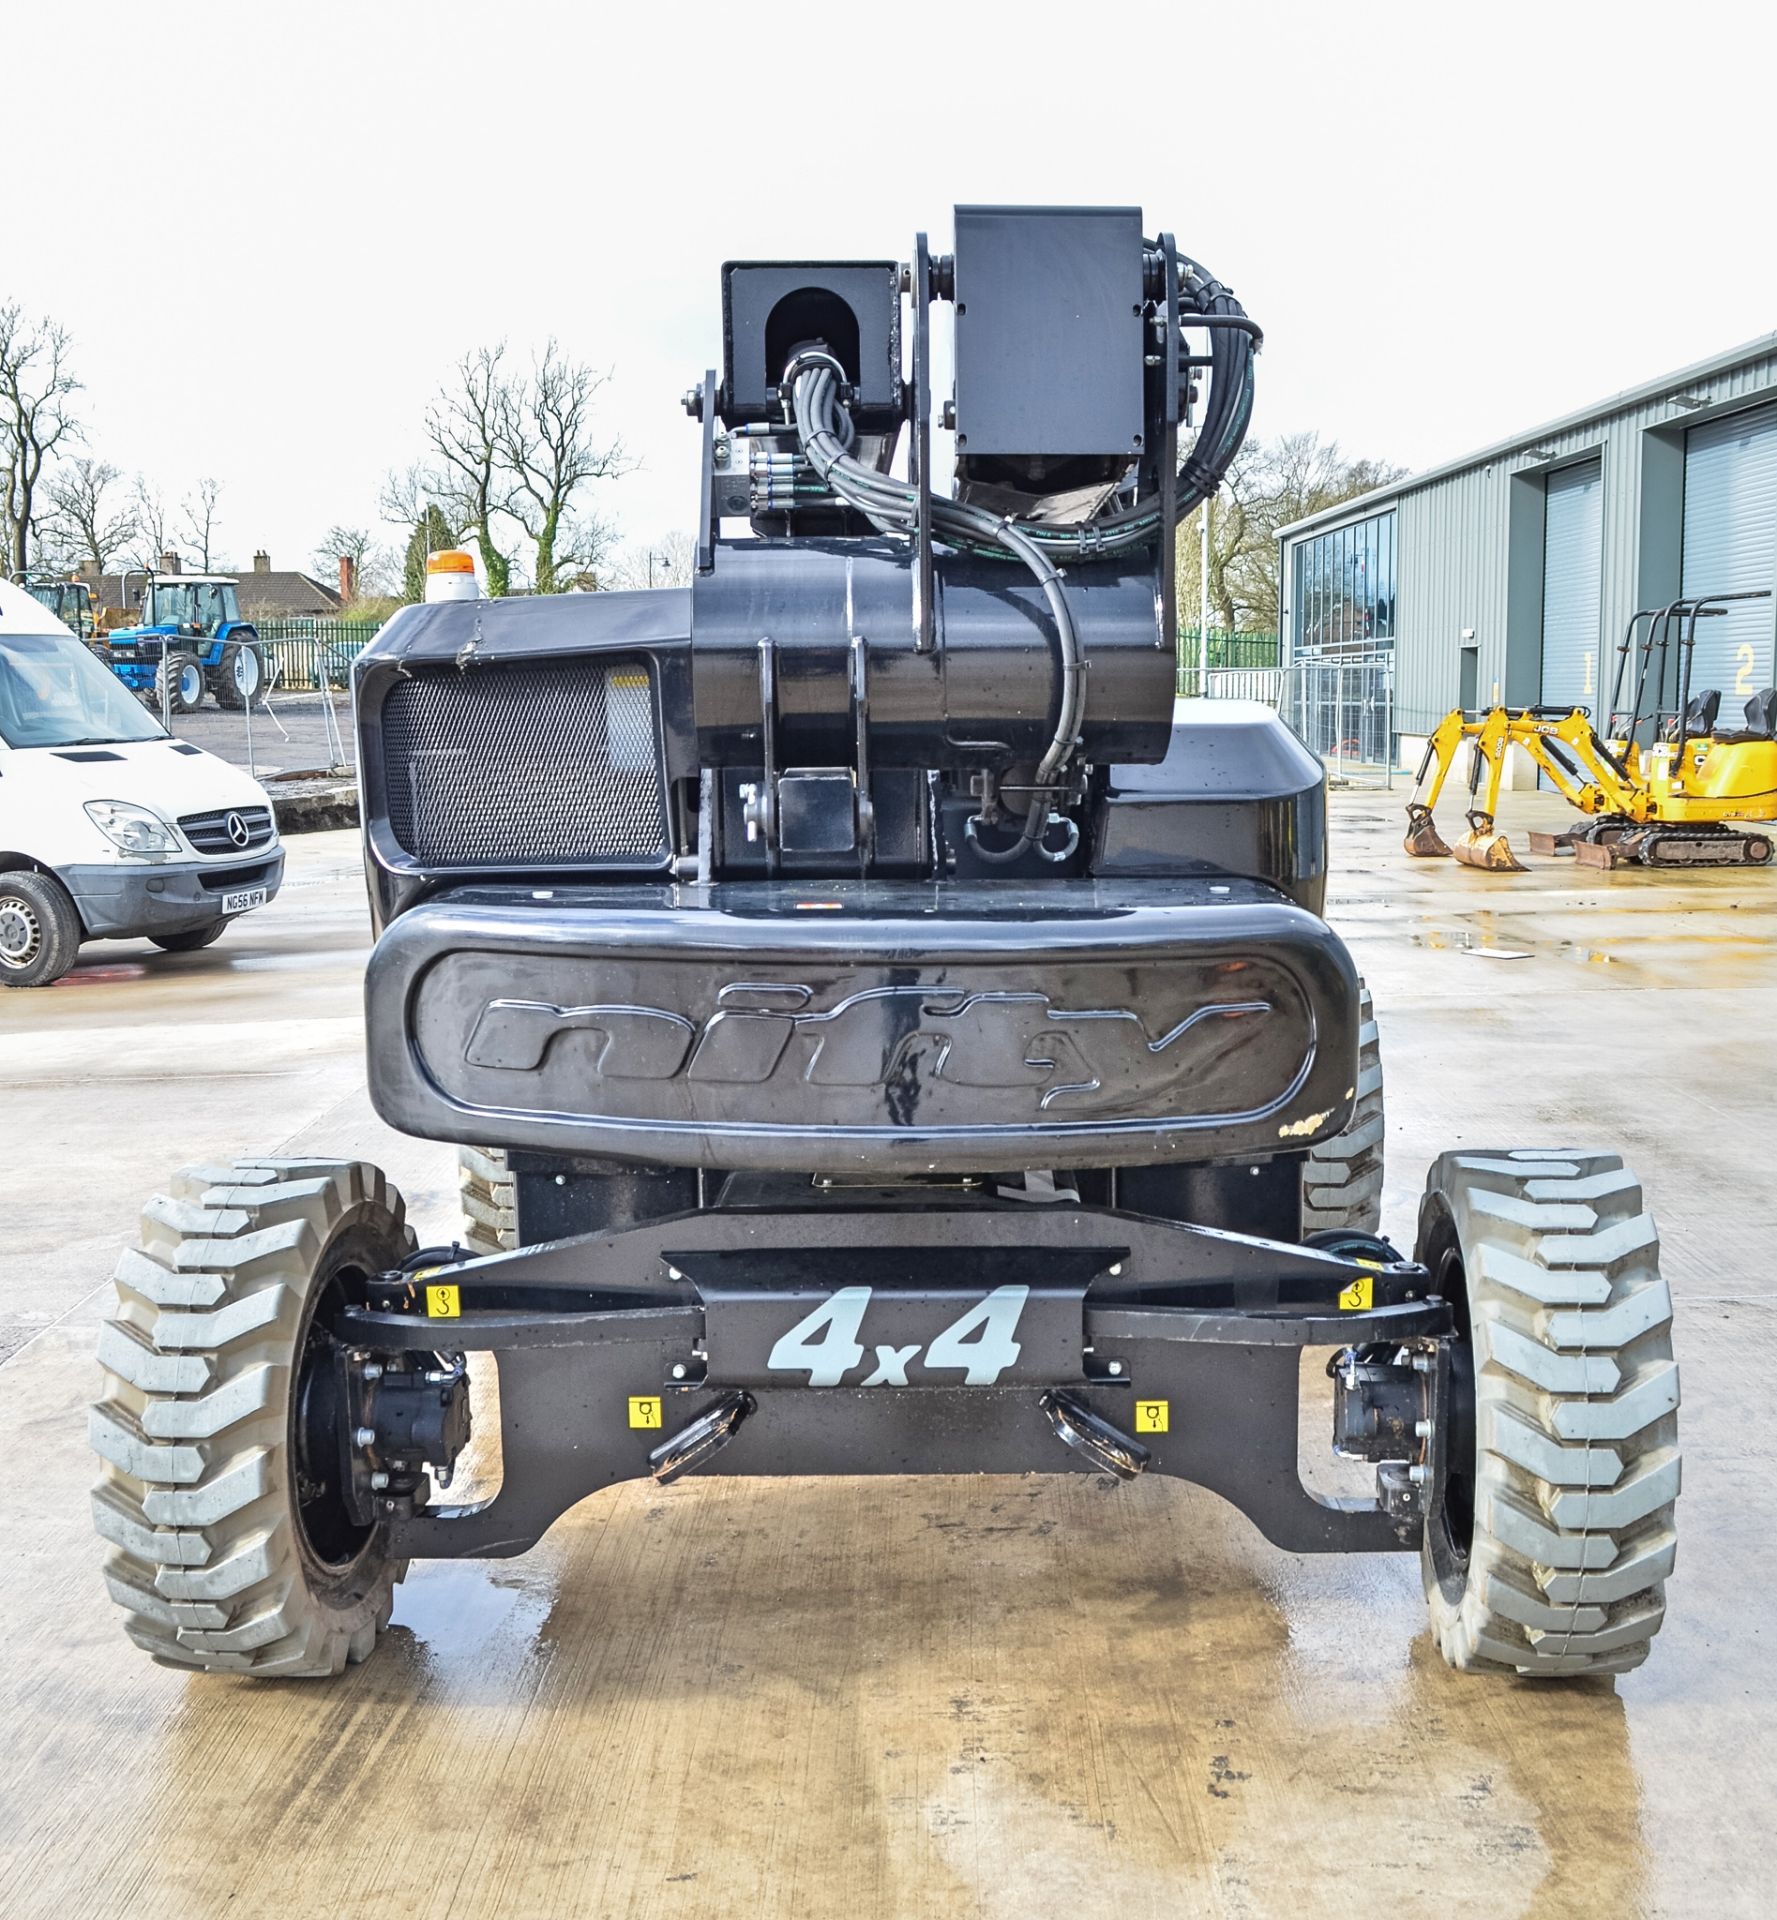 Nifty HR21 Hybrid diesel/battery electric 4x4 rough terrain articulated boom lift access platform - Image 6 of 24